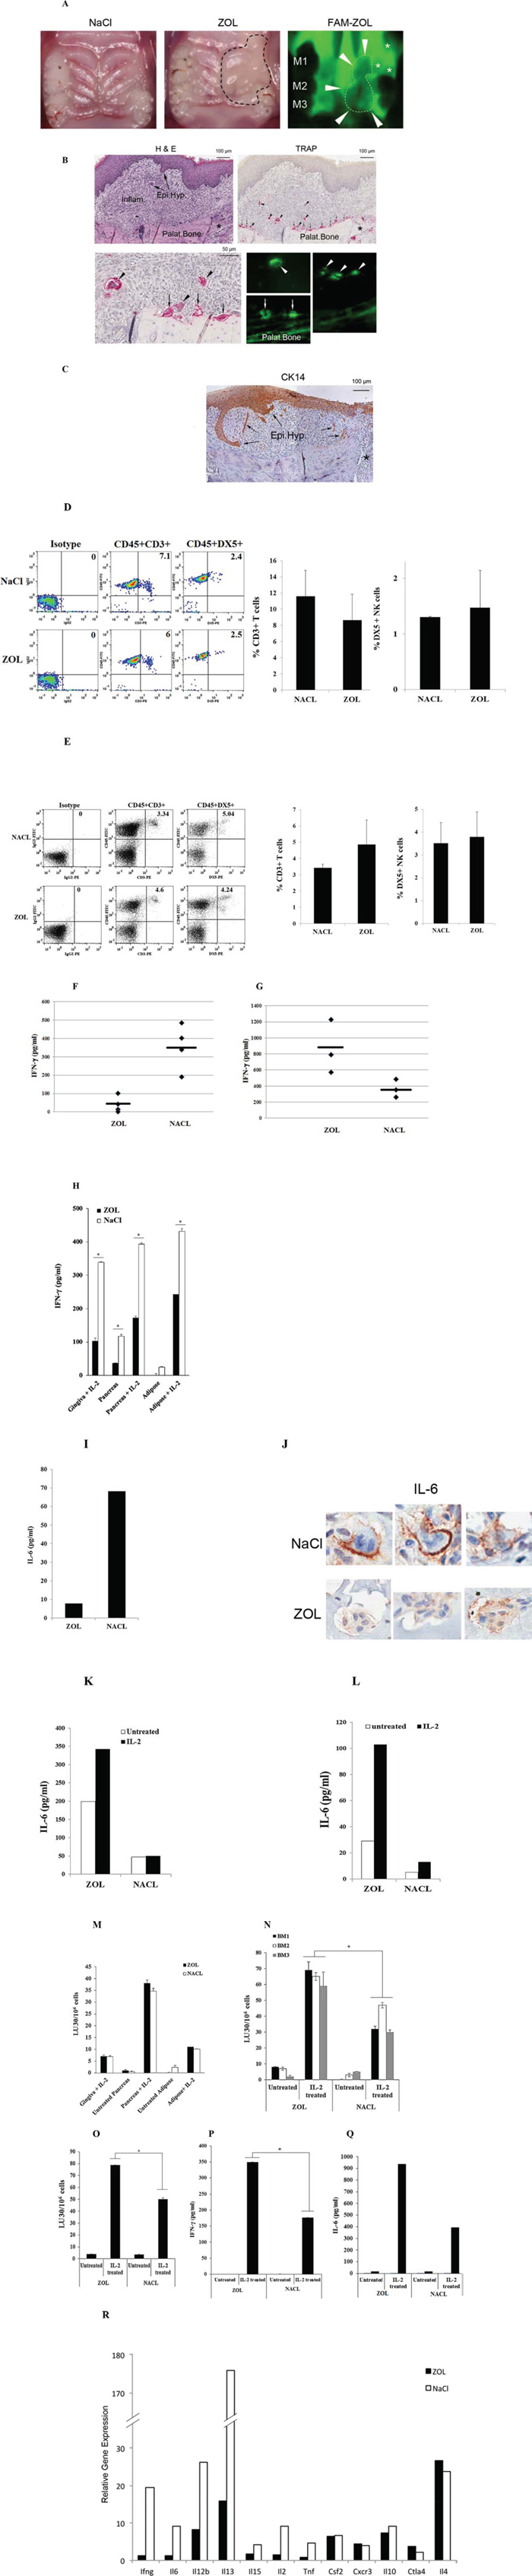 In vivo injection of ZOL triggered significant IFN-&#x03B3; and IL-6 secretion by bone marrow-derived cells but inhibited secretion by gingival cells.